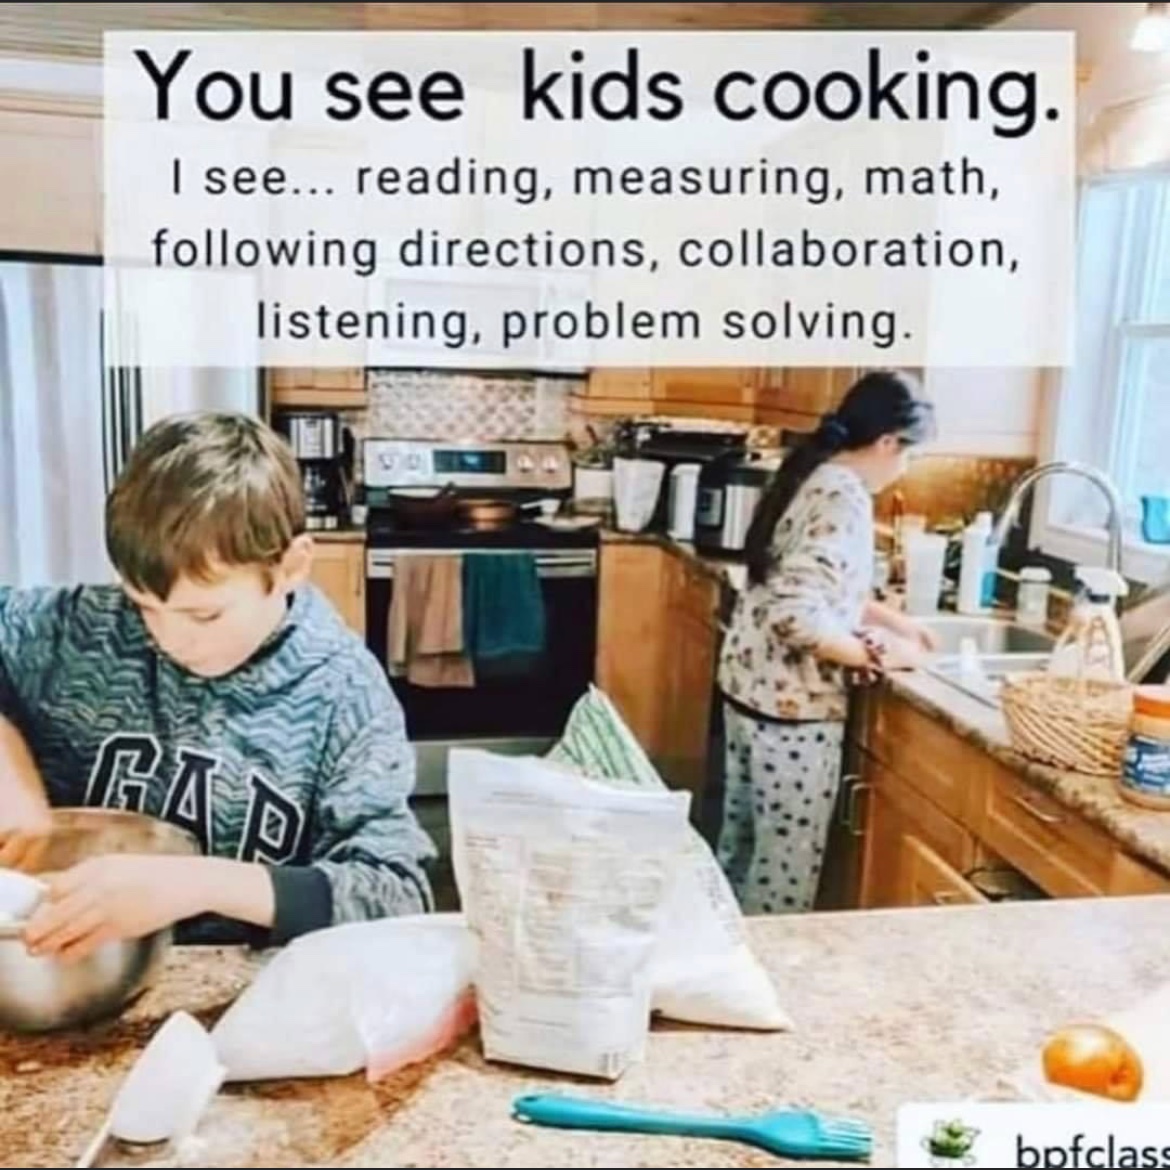 and making a mess. 😂 Seriously though, getting your kids into the kitchen with you strengthens your bond. It’s an easy way to connect & teach your children essential life skills.
 #parenting #FamilyCounseling #MFT #BoyMom